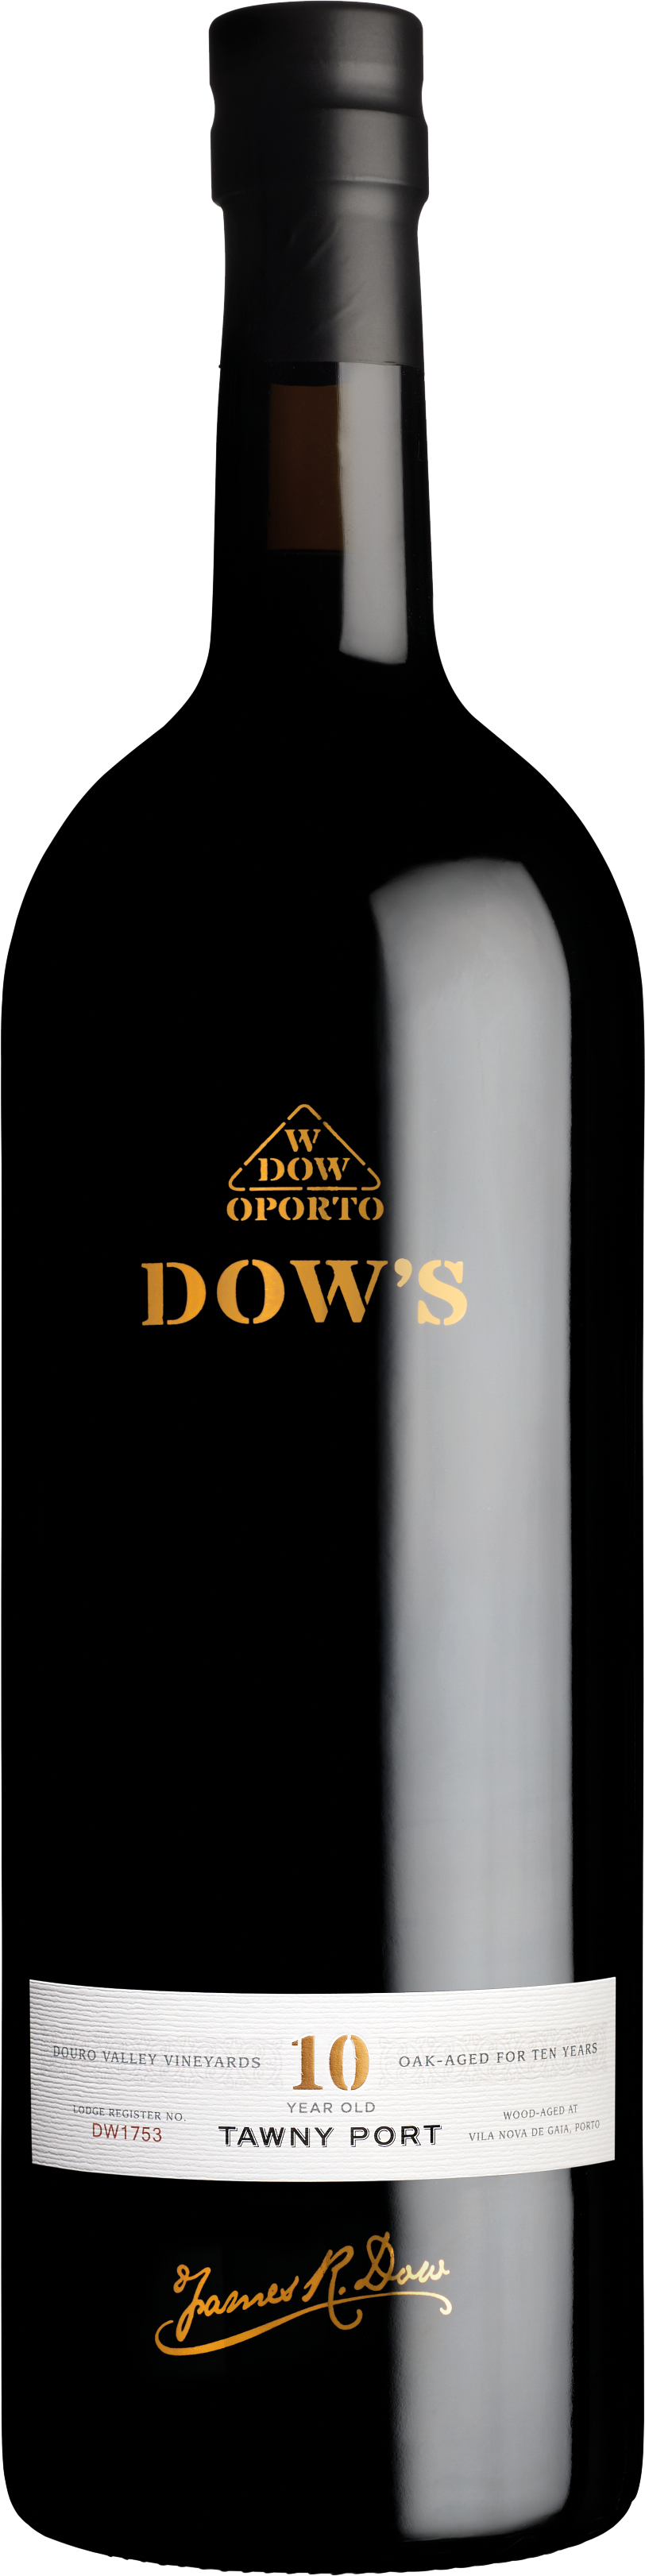 Product Image for DOW'S 10 YEAR OLD TAWNY PORT - DOUBLE MAGNUM